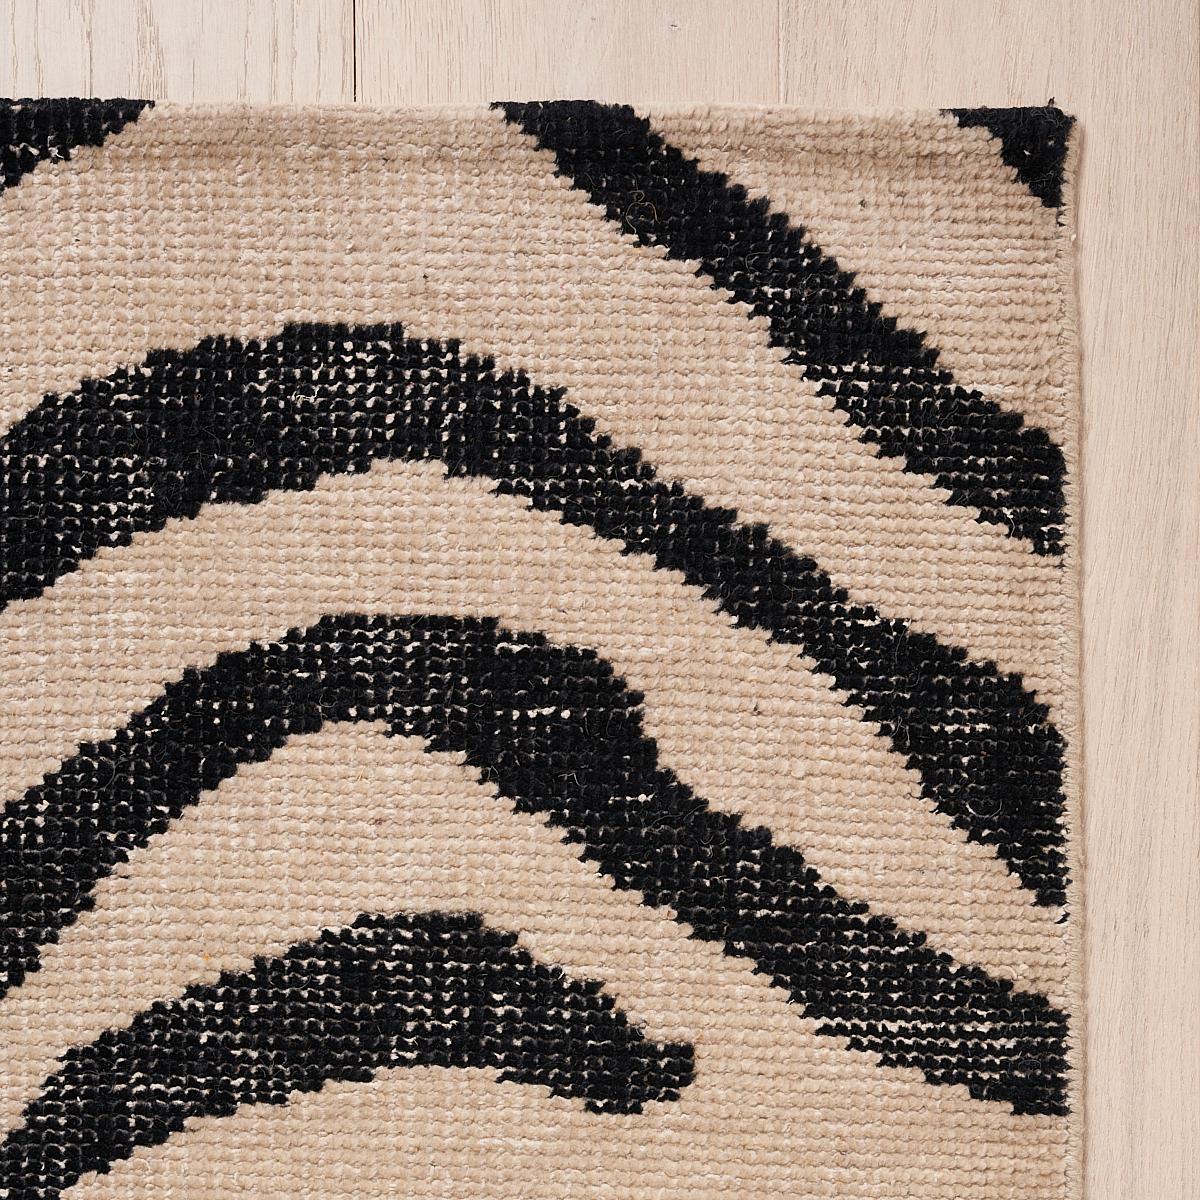 This rug will ship in December. A wildly chic hand-knotted design made of wool and cotton, Zebre features a large-scale abstract animal pattern. Inspired by our popular Ze’bre Epingle fabric, this is a fabulously versatile graphic design that never